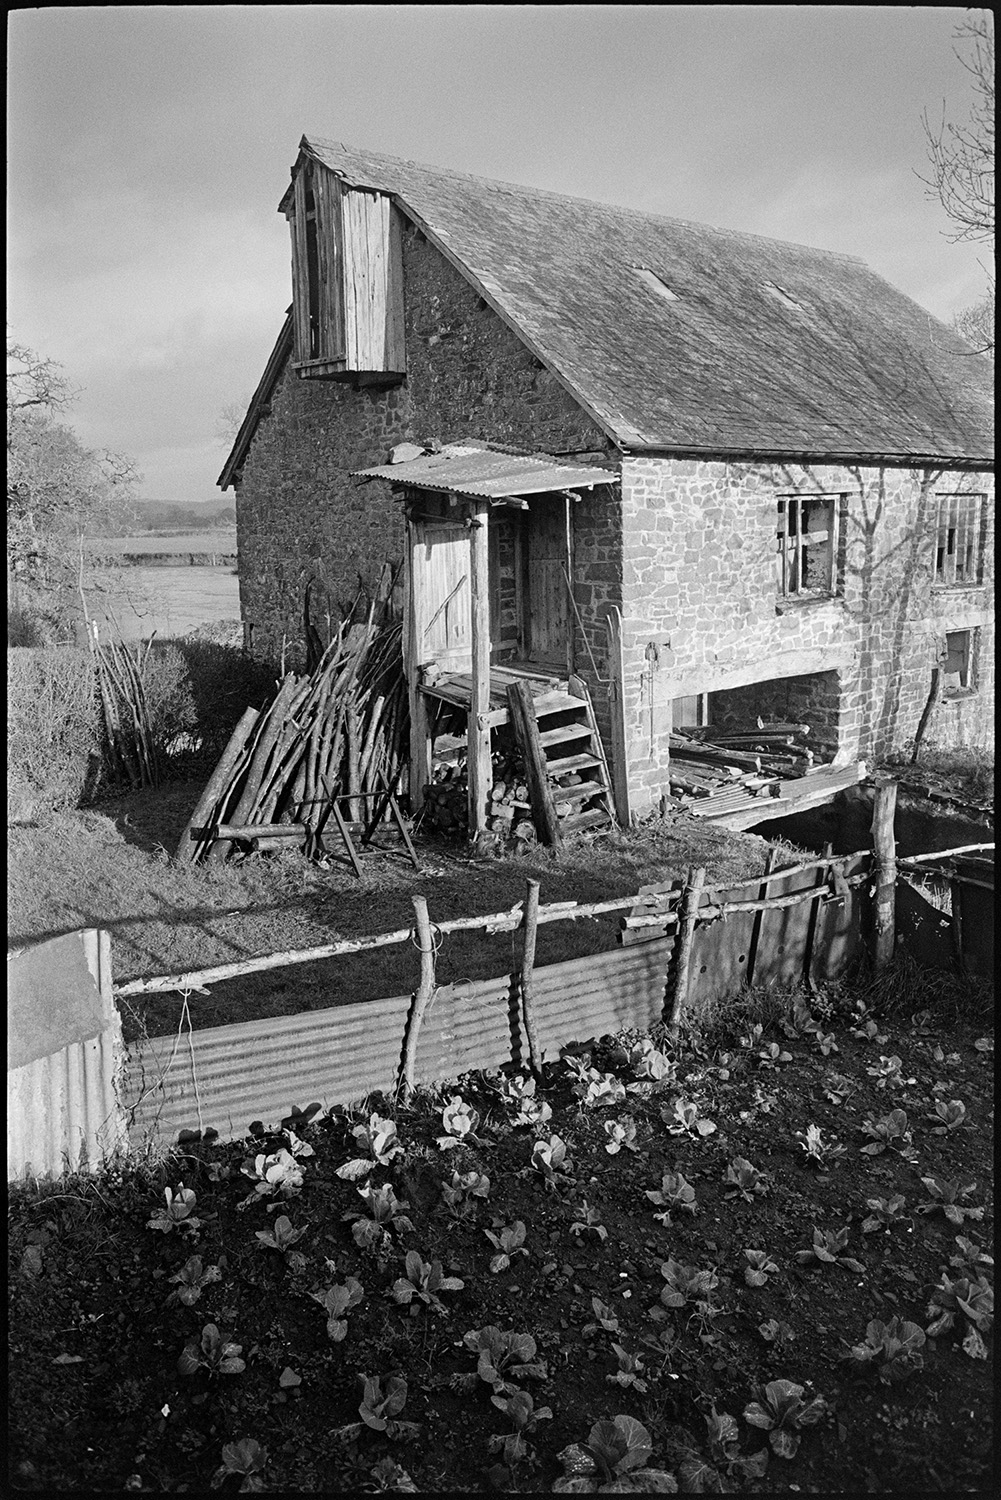 Views inside and outside of mill showing wheel and machinery and workshop. Stored nitches thatch.<br />
[Exterior view of Rashleigh Mill, Bridge Reeve, with a wood pile leaning against the end wall and a vegetable garden in front of the Mill, sectioned off with a fence made from corrugated iron sheets and branches. A set of wooden steps also leads up to the first floor of the mill.]